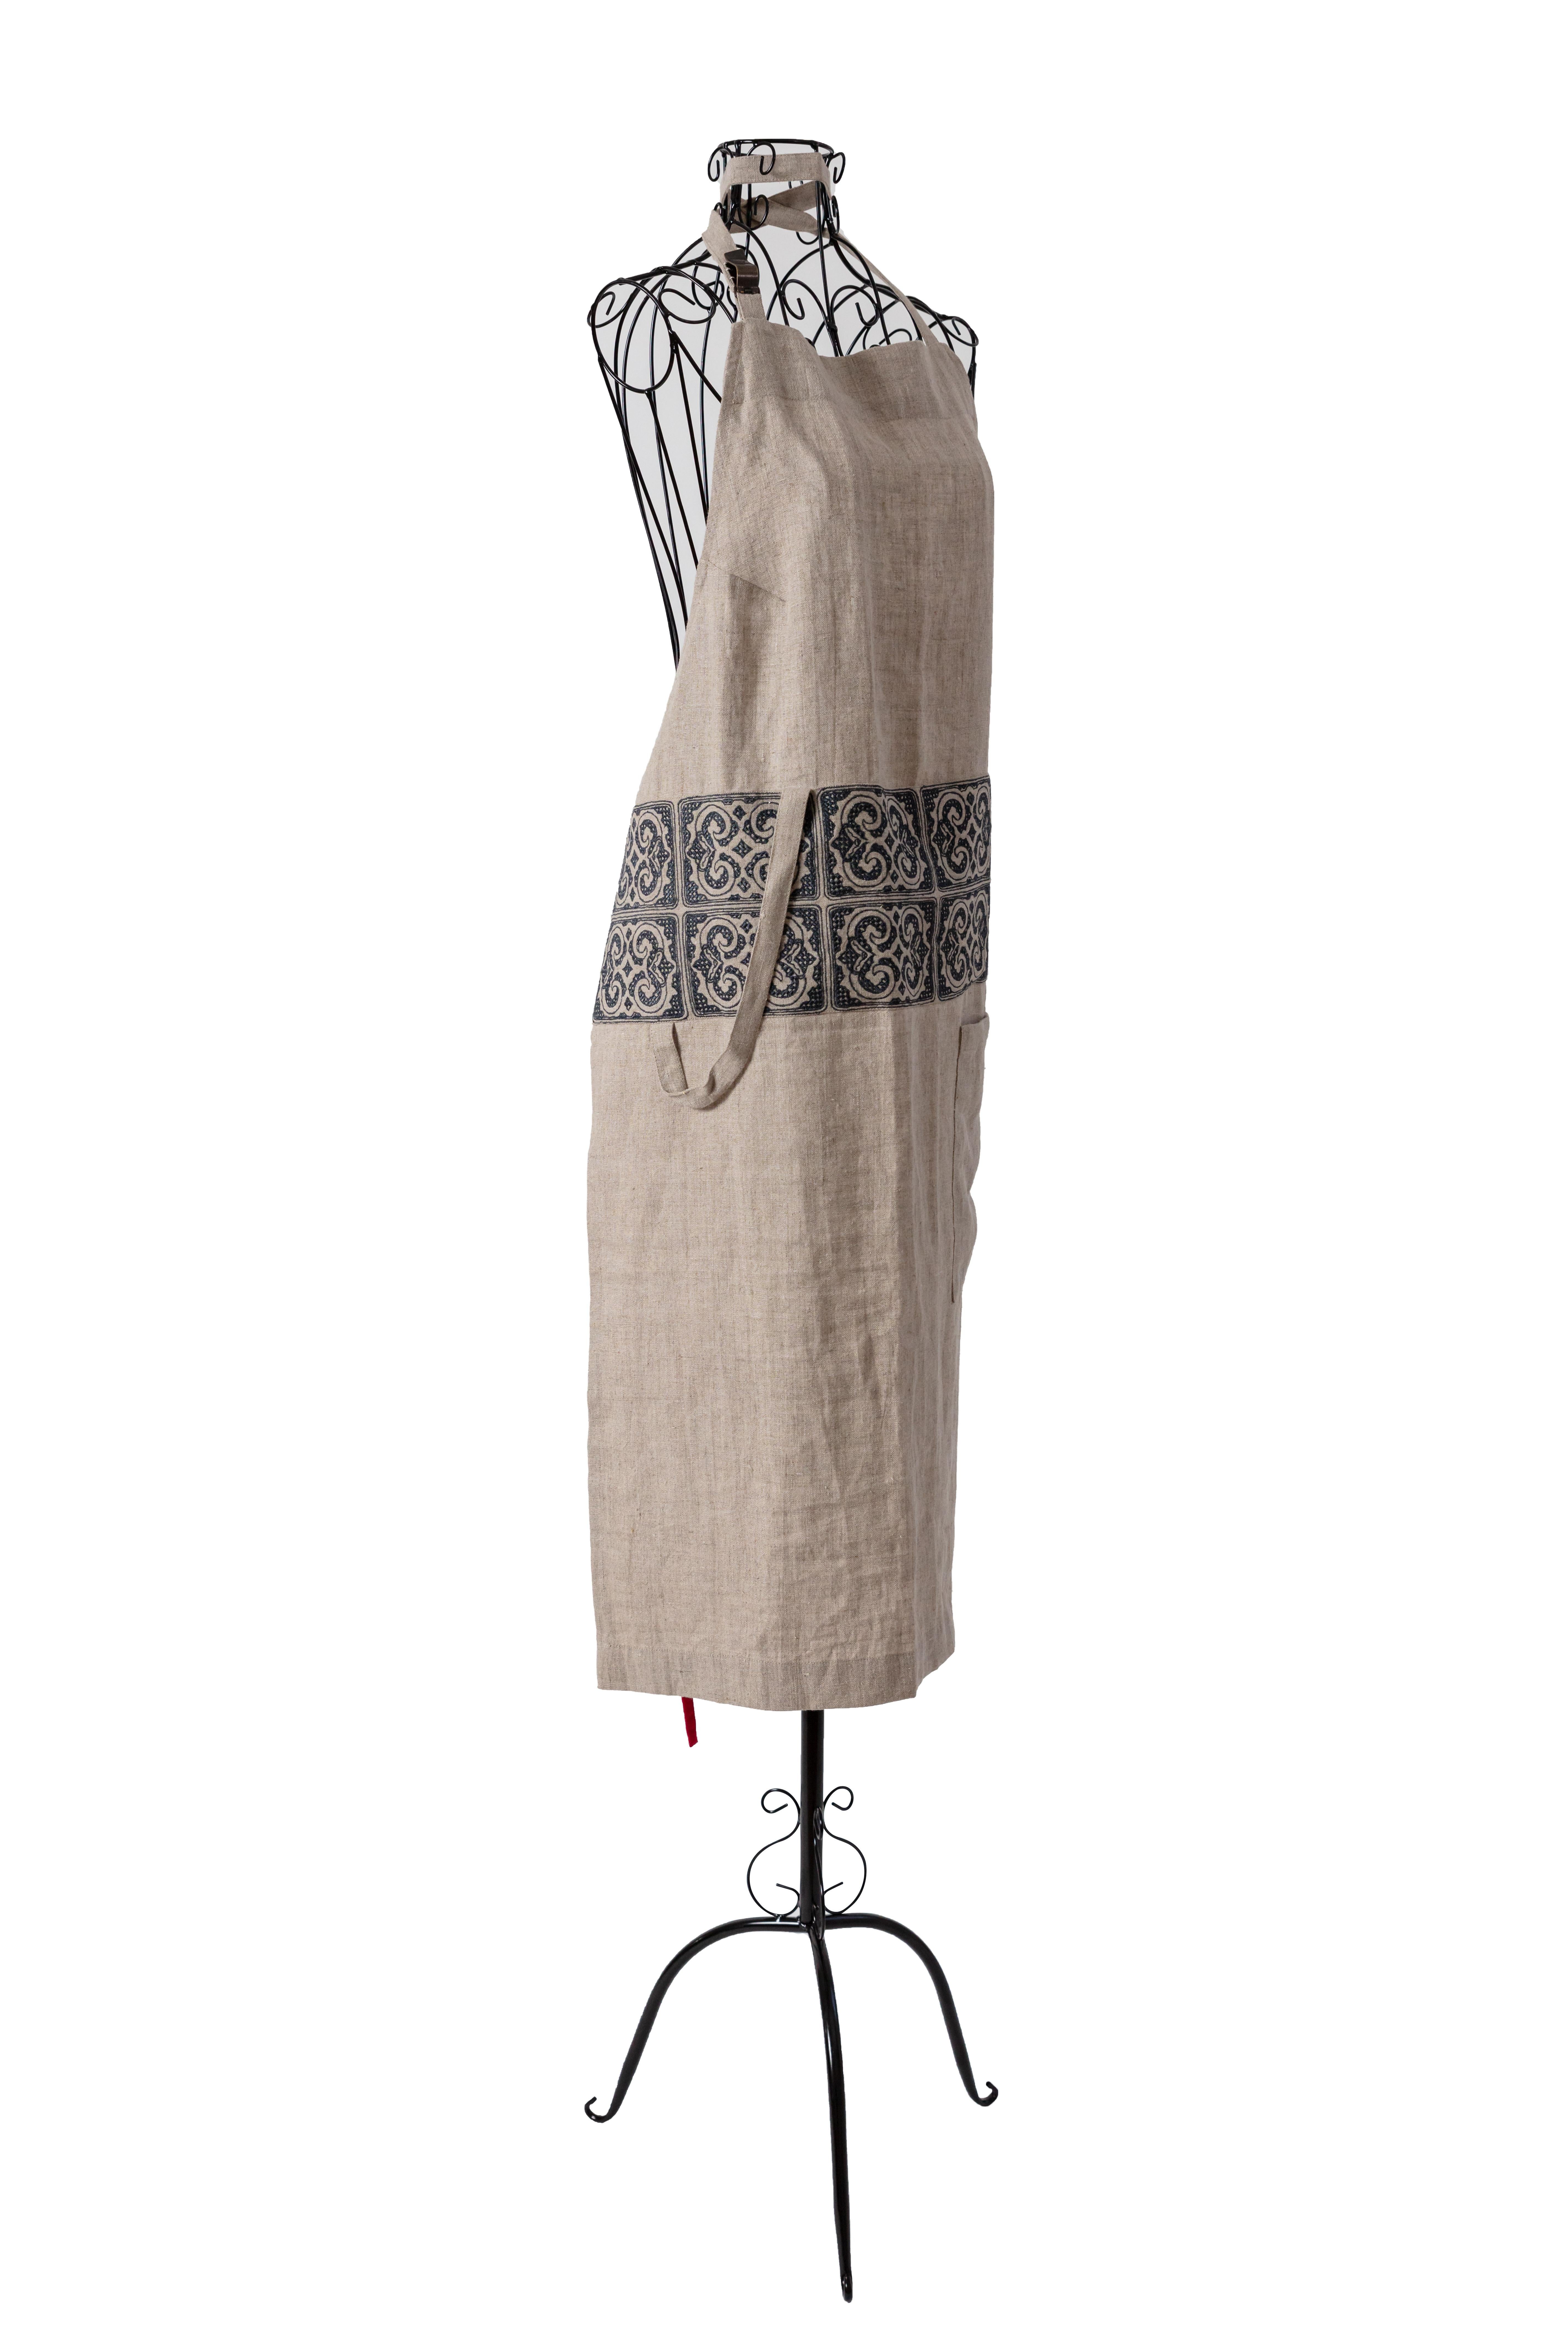 This hand-embroidered linen apron from SoShiro’s Ainu collection, a collaboration between award-winning artist Toru Kaizawa and Shiro Muchiri, took design cues from leading chefs, resulting in the addition of clever loops and pockets. 

The apron,